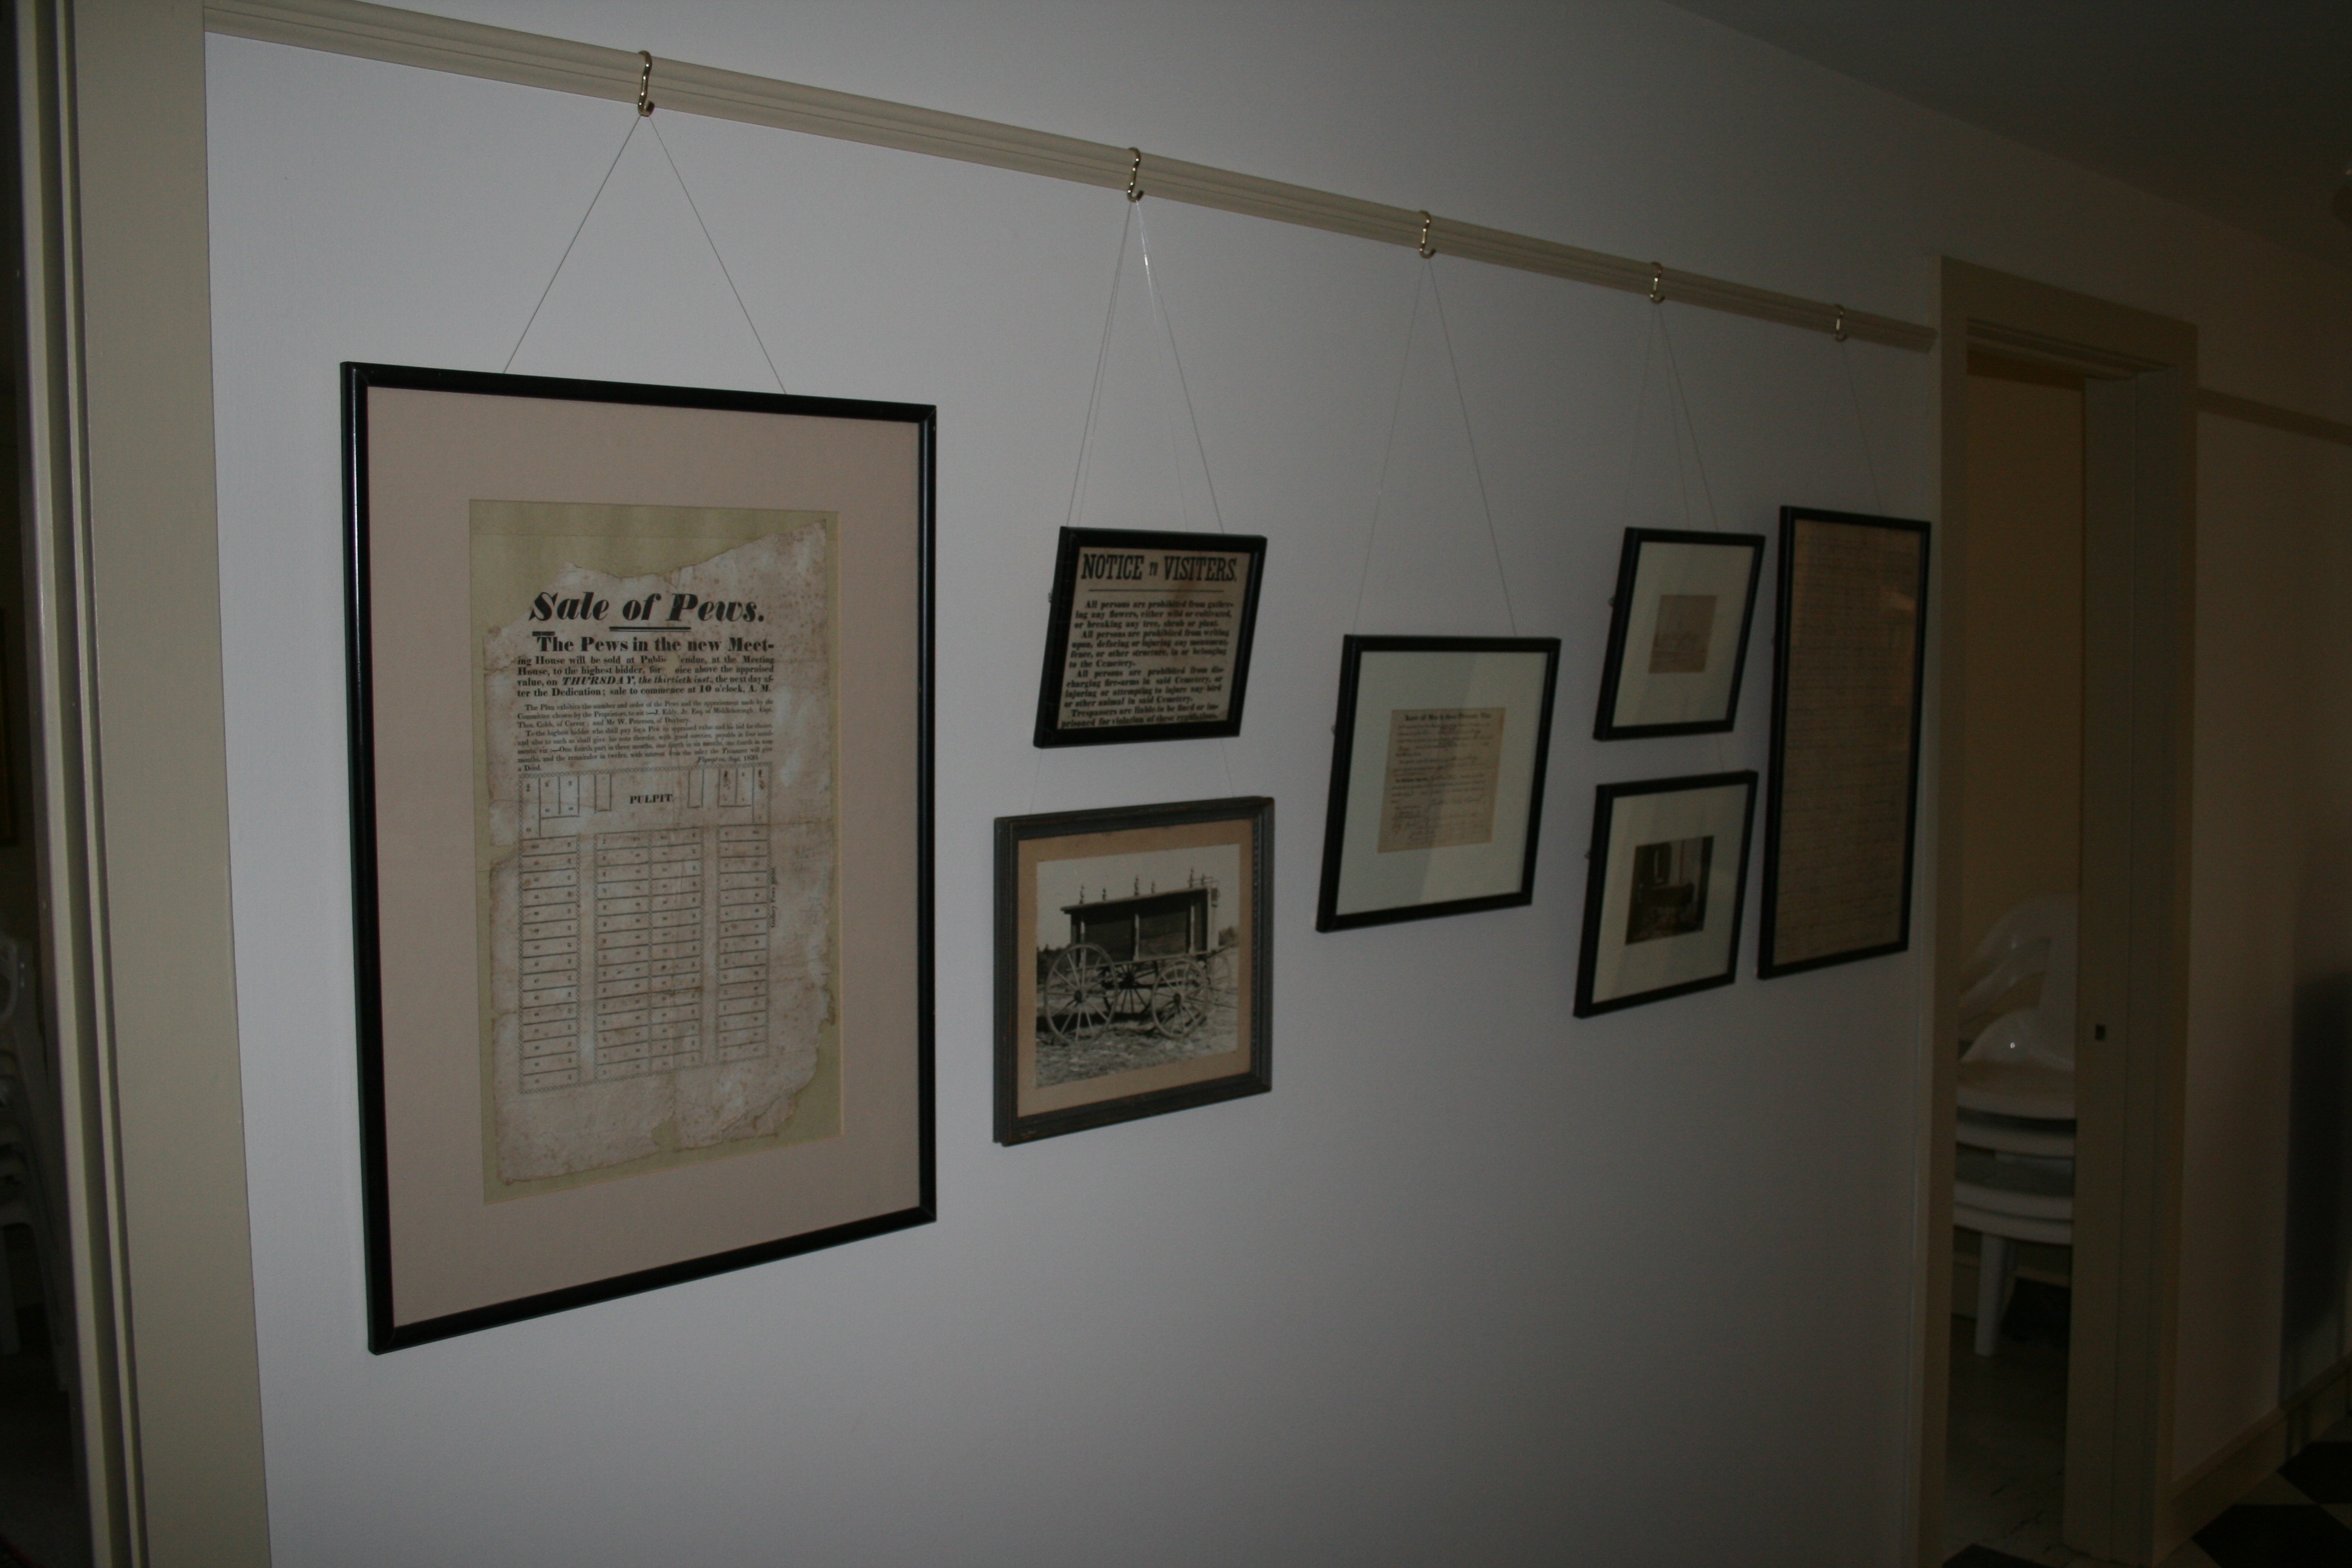 Historical photos and documents on display